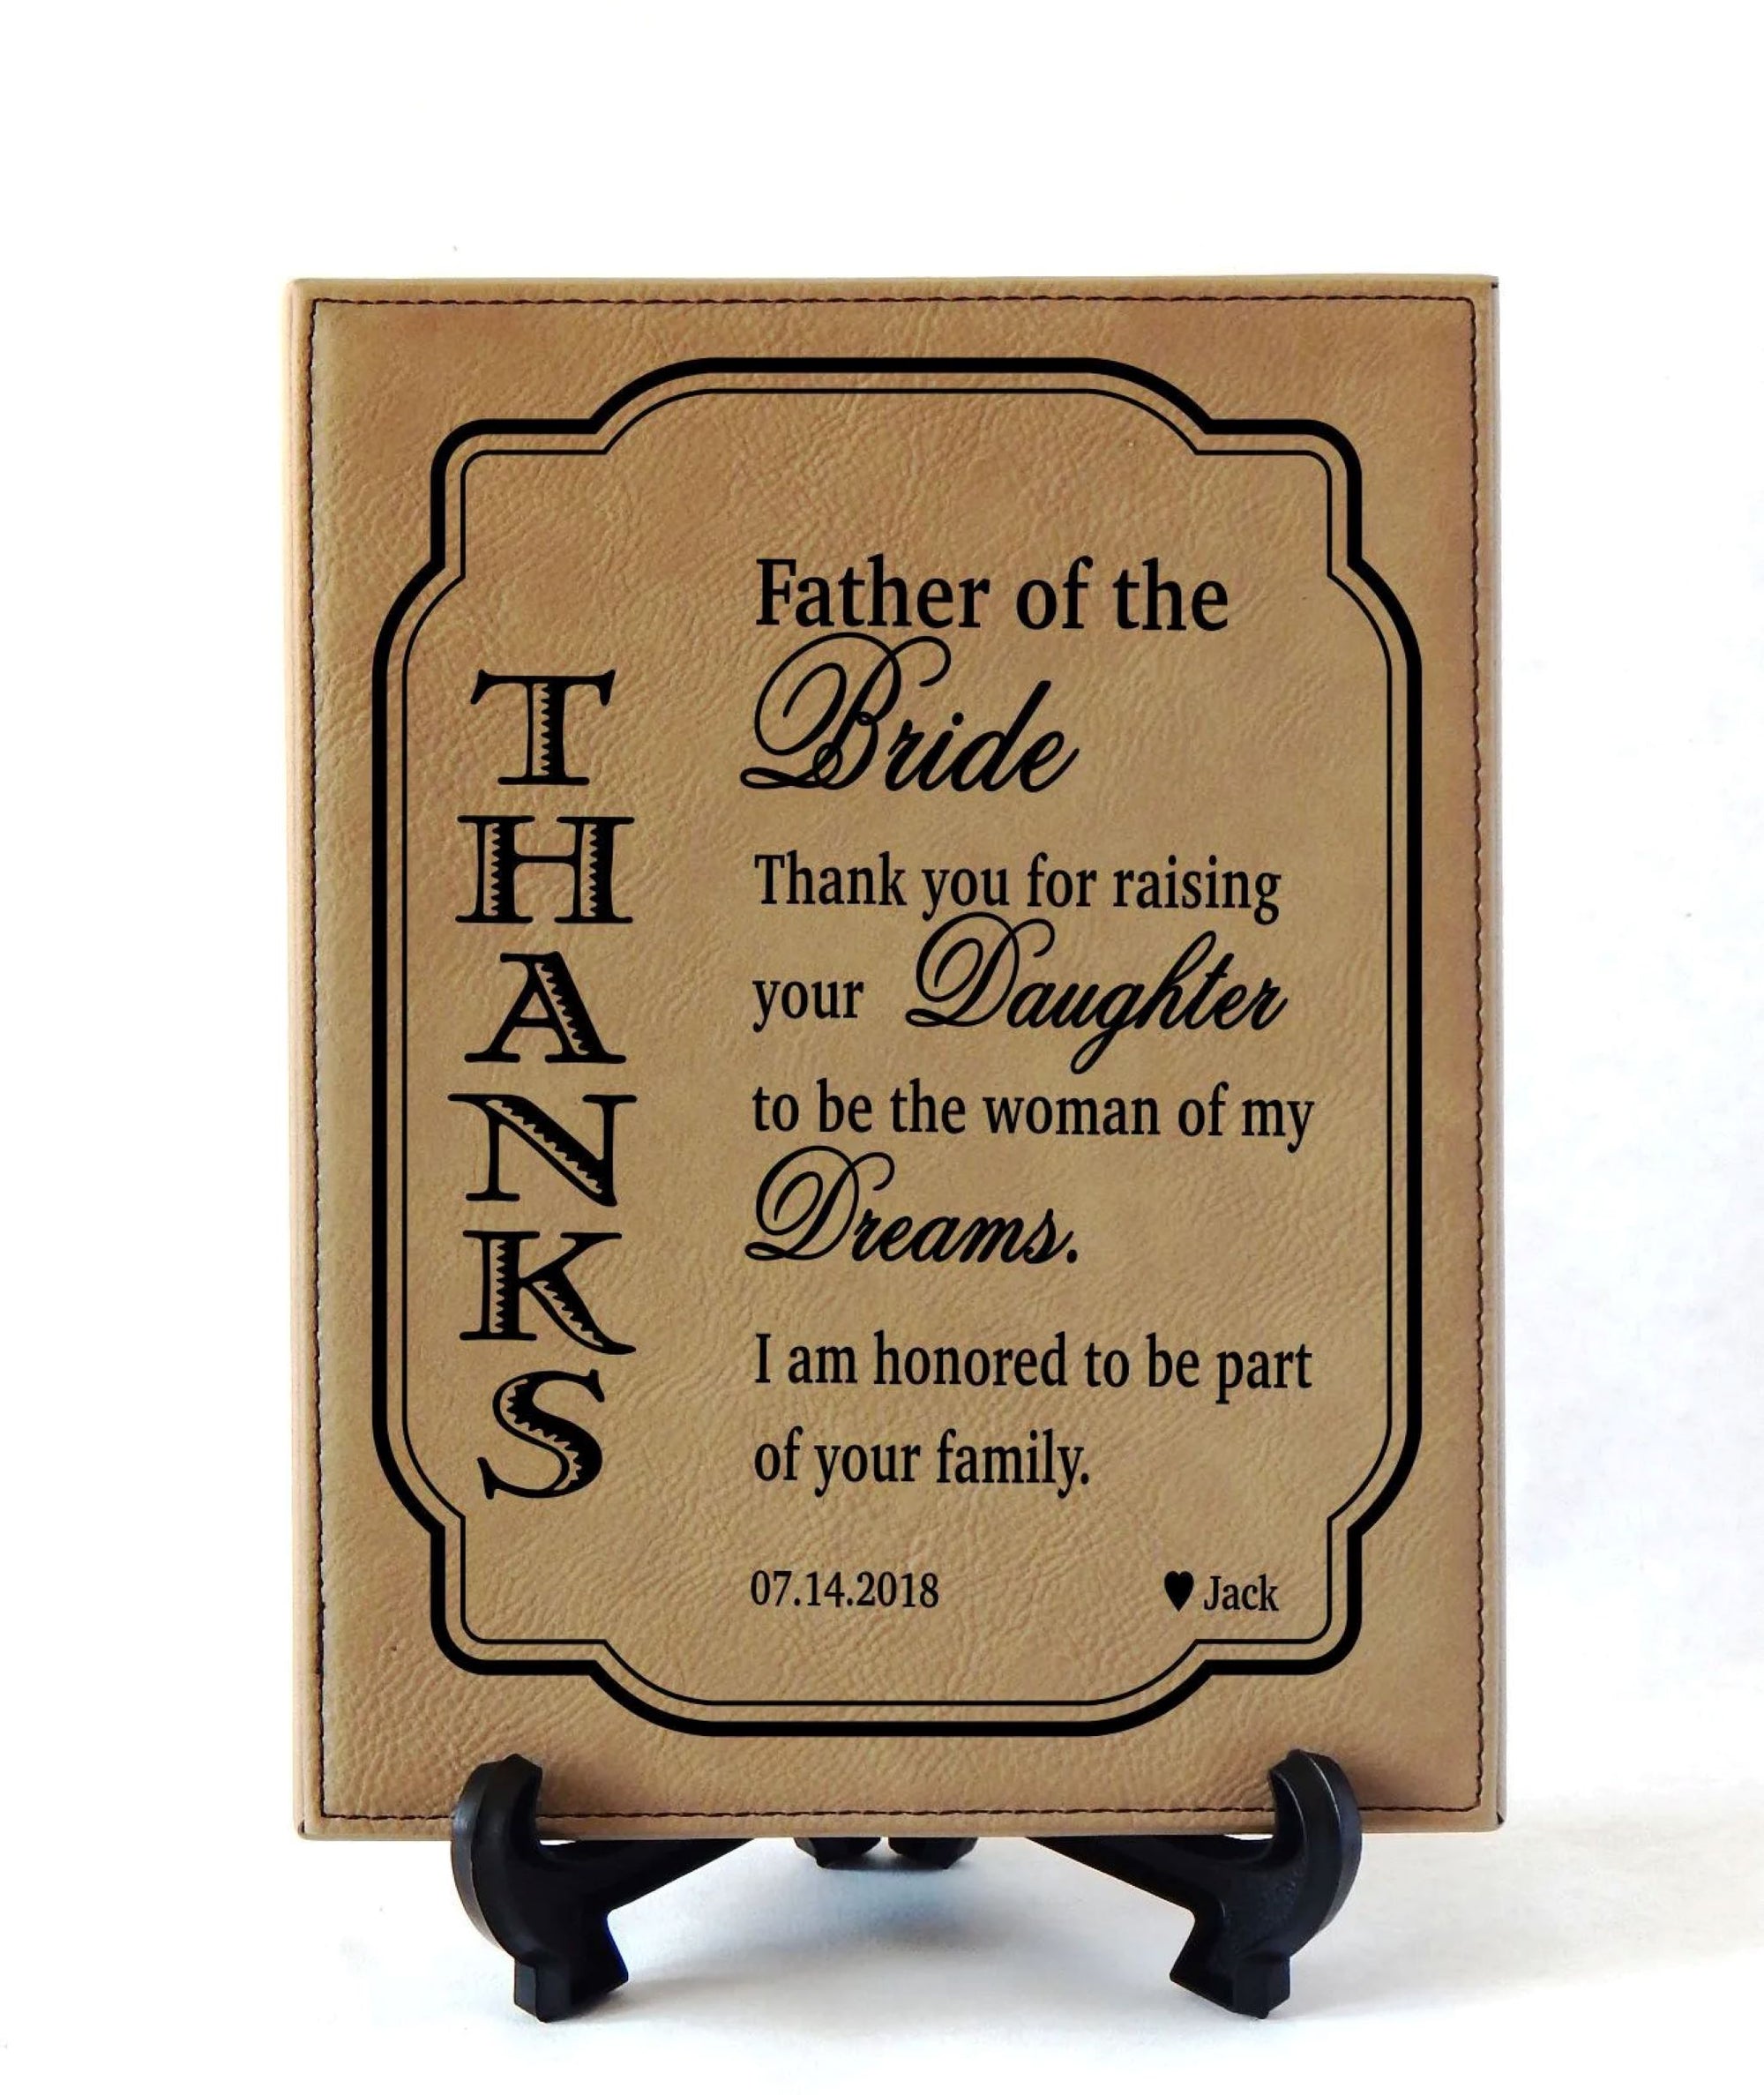 Father of the Bride Wedding Gift from Groom | Gifts for Mother In Law | Leather Plaque